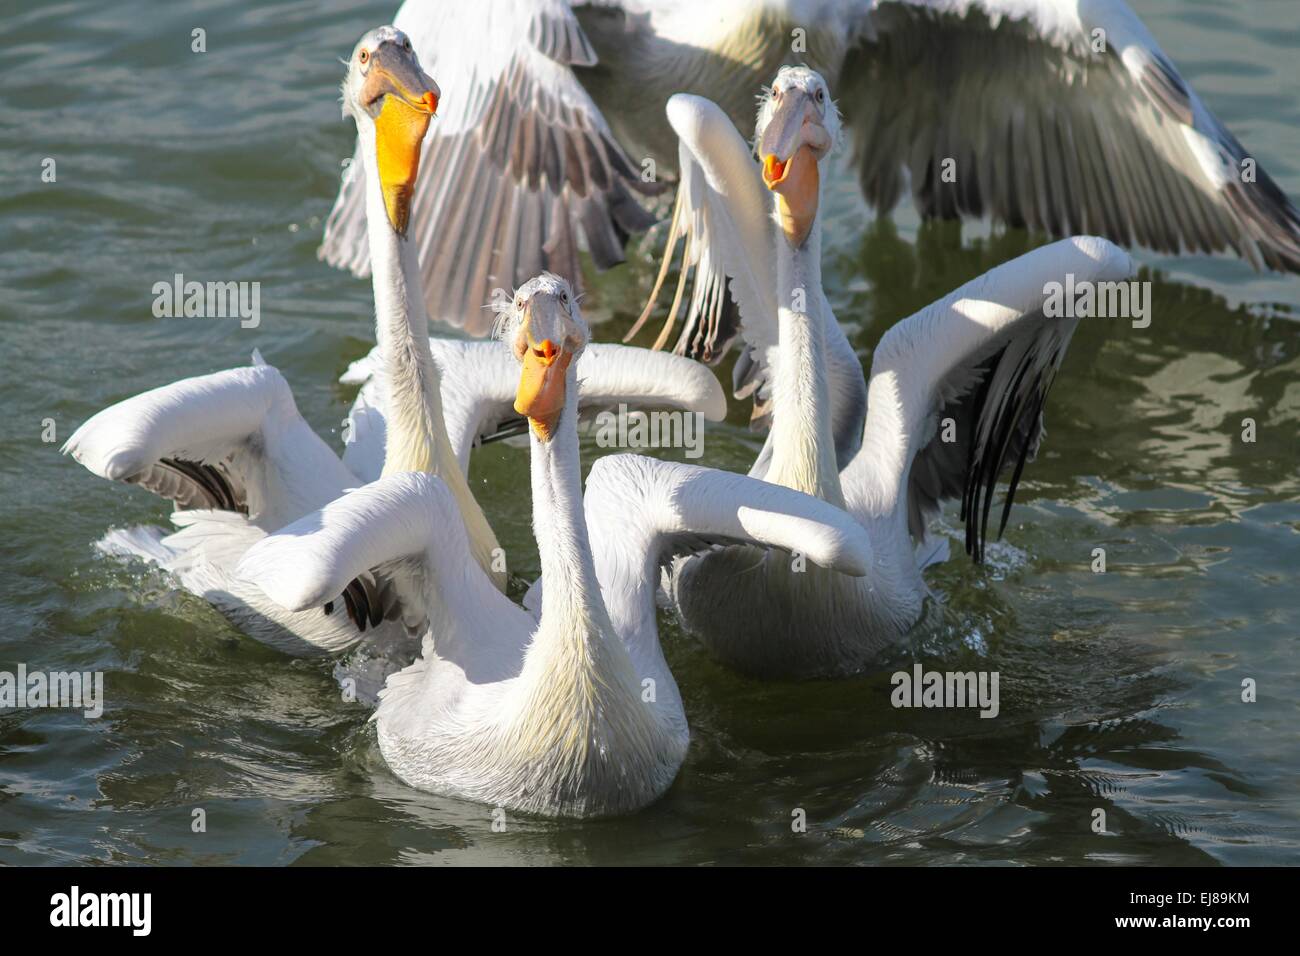 Funny pelicans in the water Stock Photo